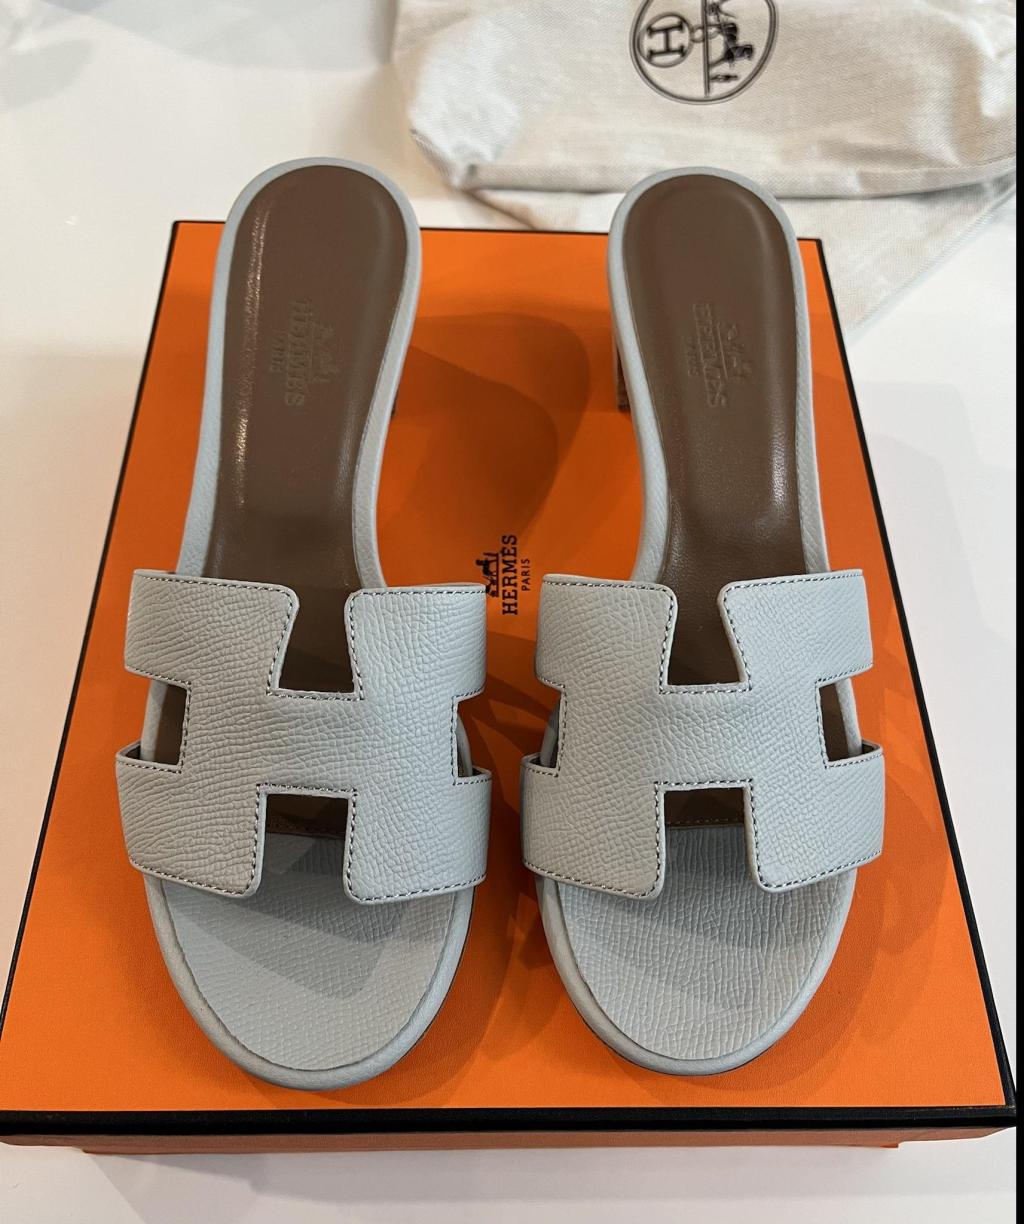 [Review] Hermes Oasis Sandal – Pale Blue From GT Factory